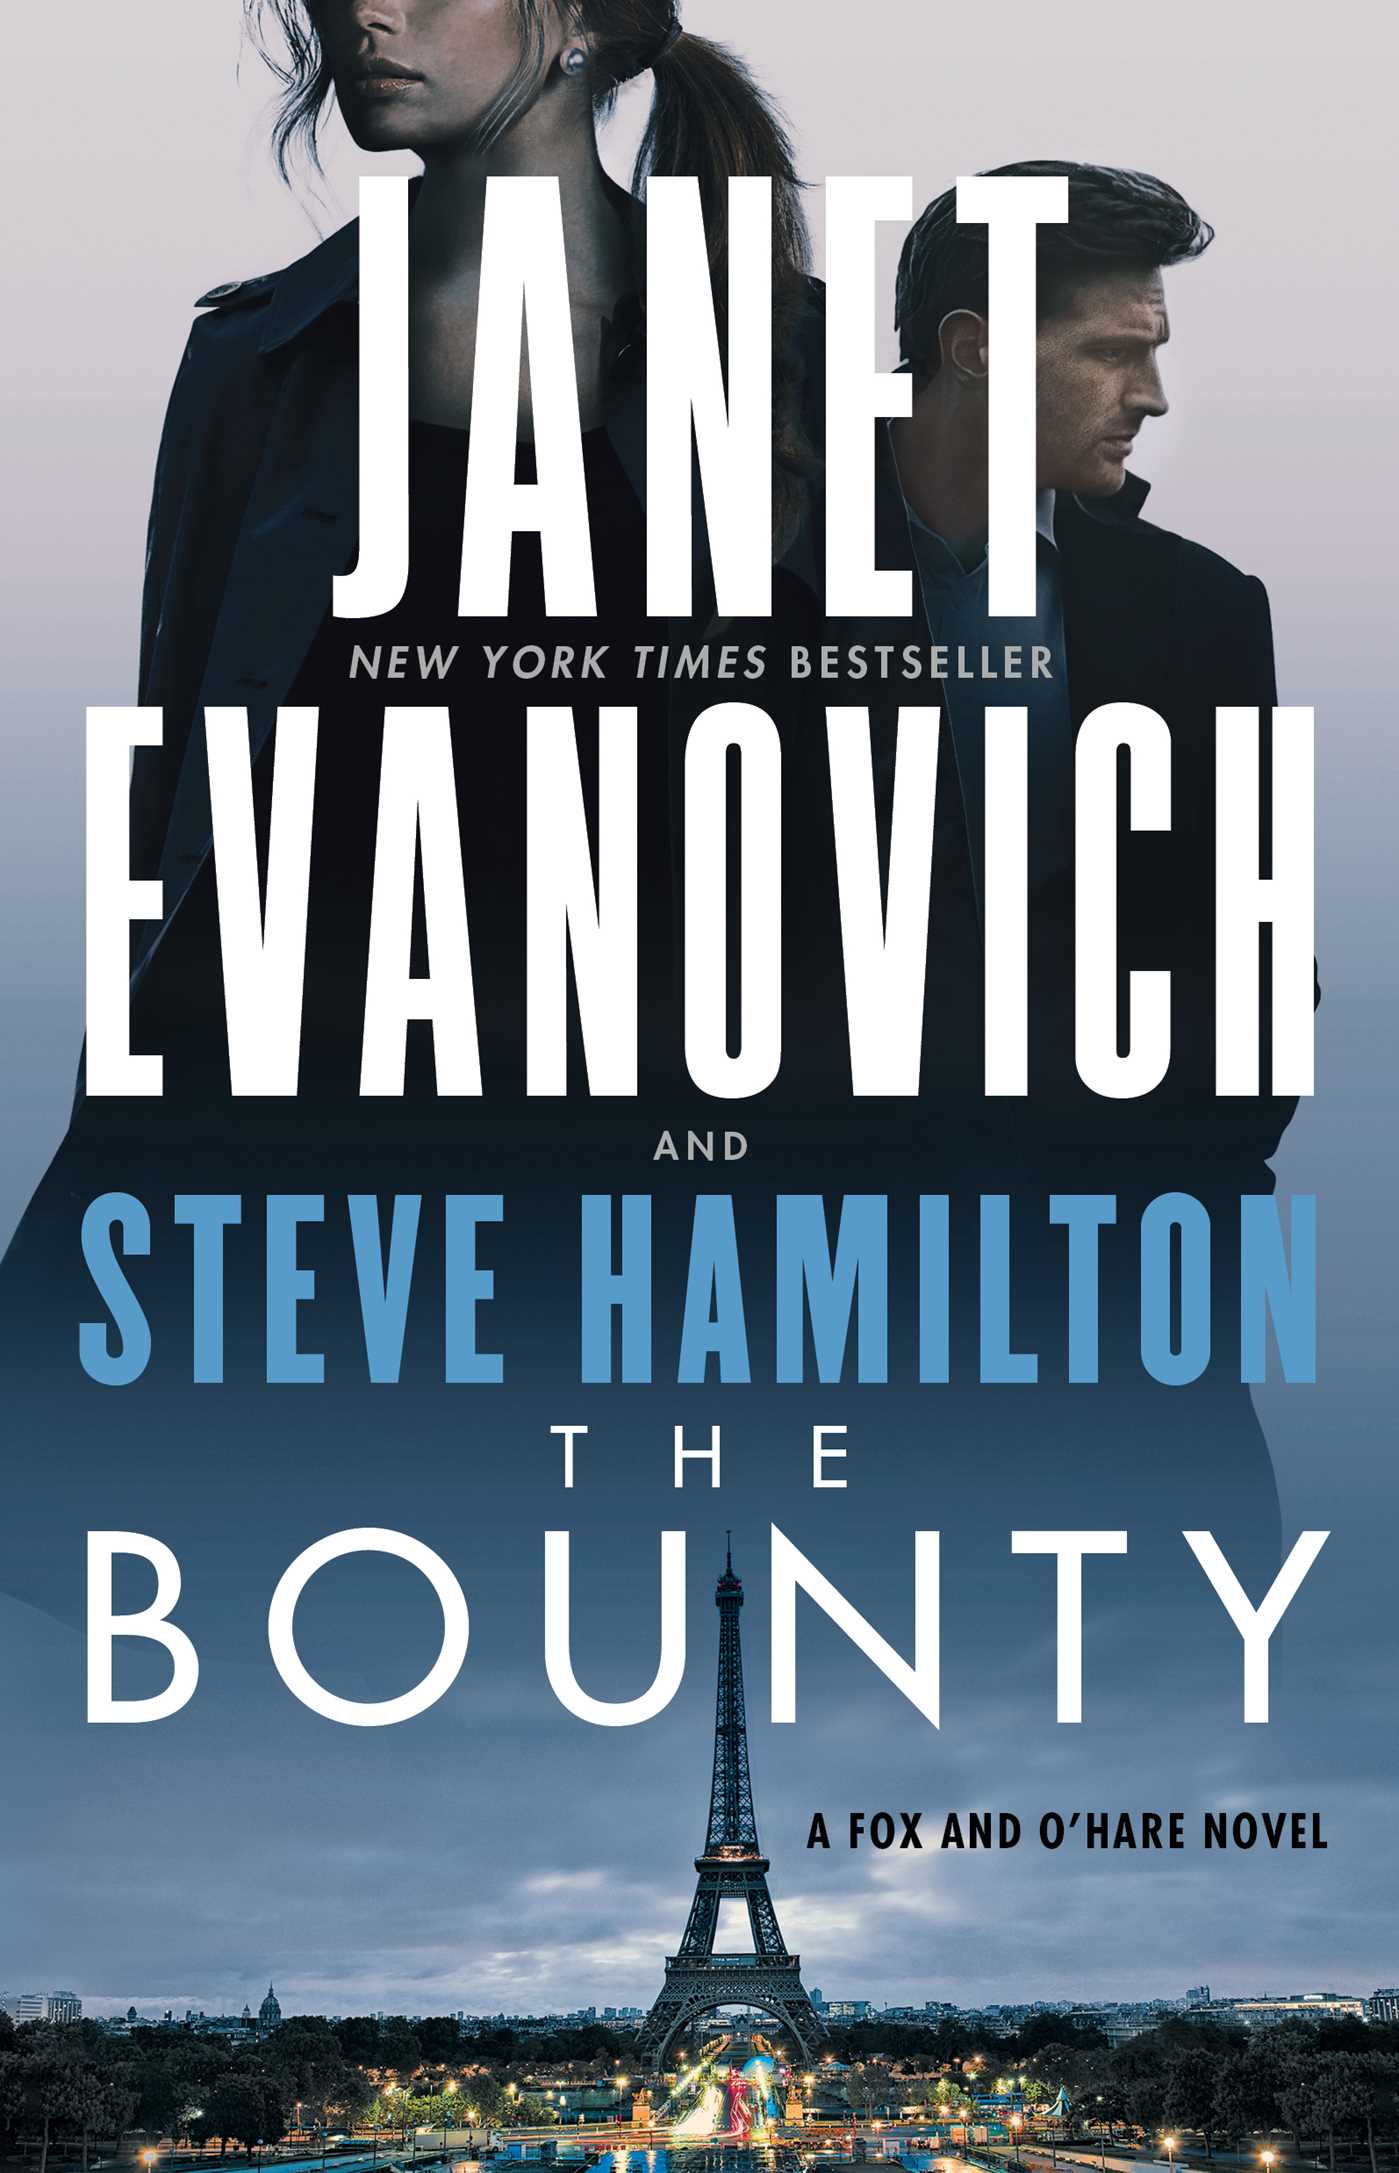 The Bounty cover image